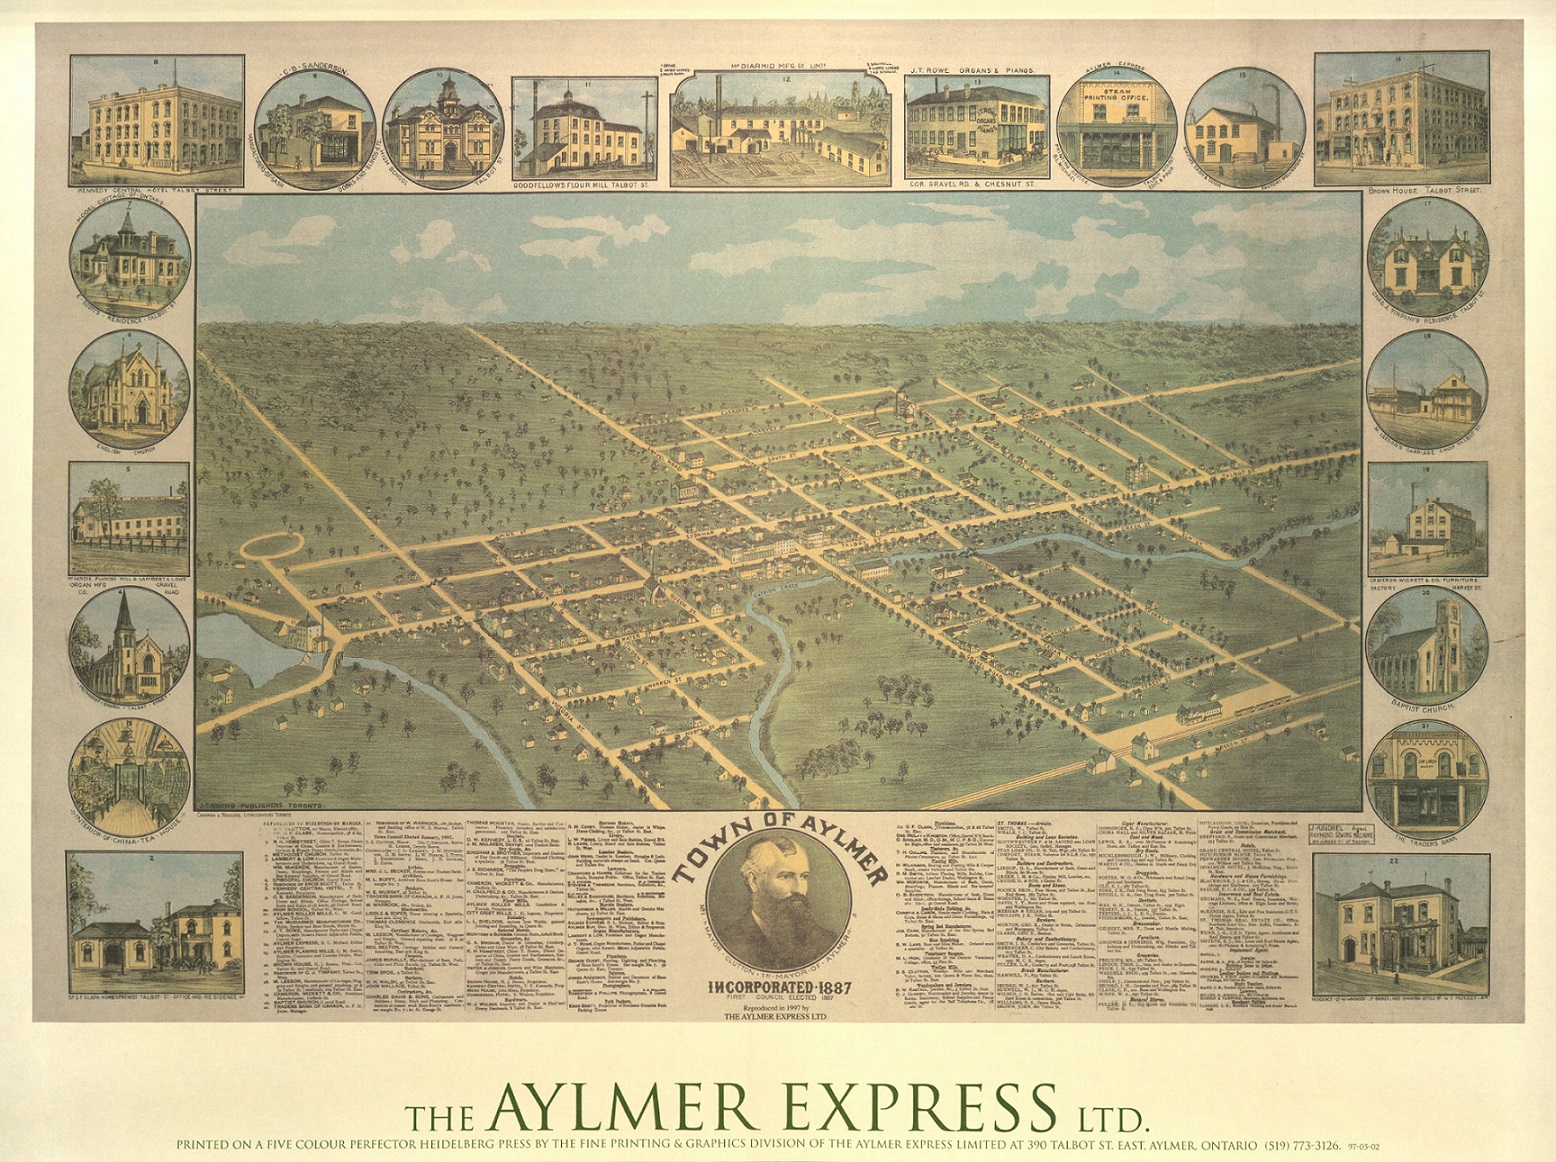 Image of the map of the town of Aylmer for sale at the Aylmer Museum. Depicts a bird's eye view of the town, and has images of various buildings around town at the border.